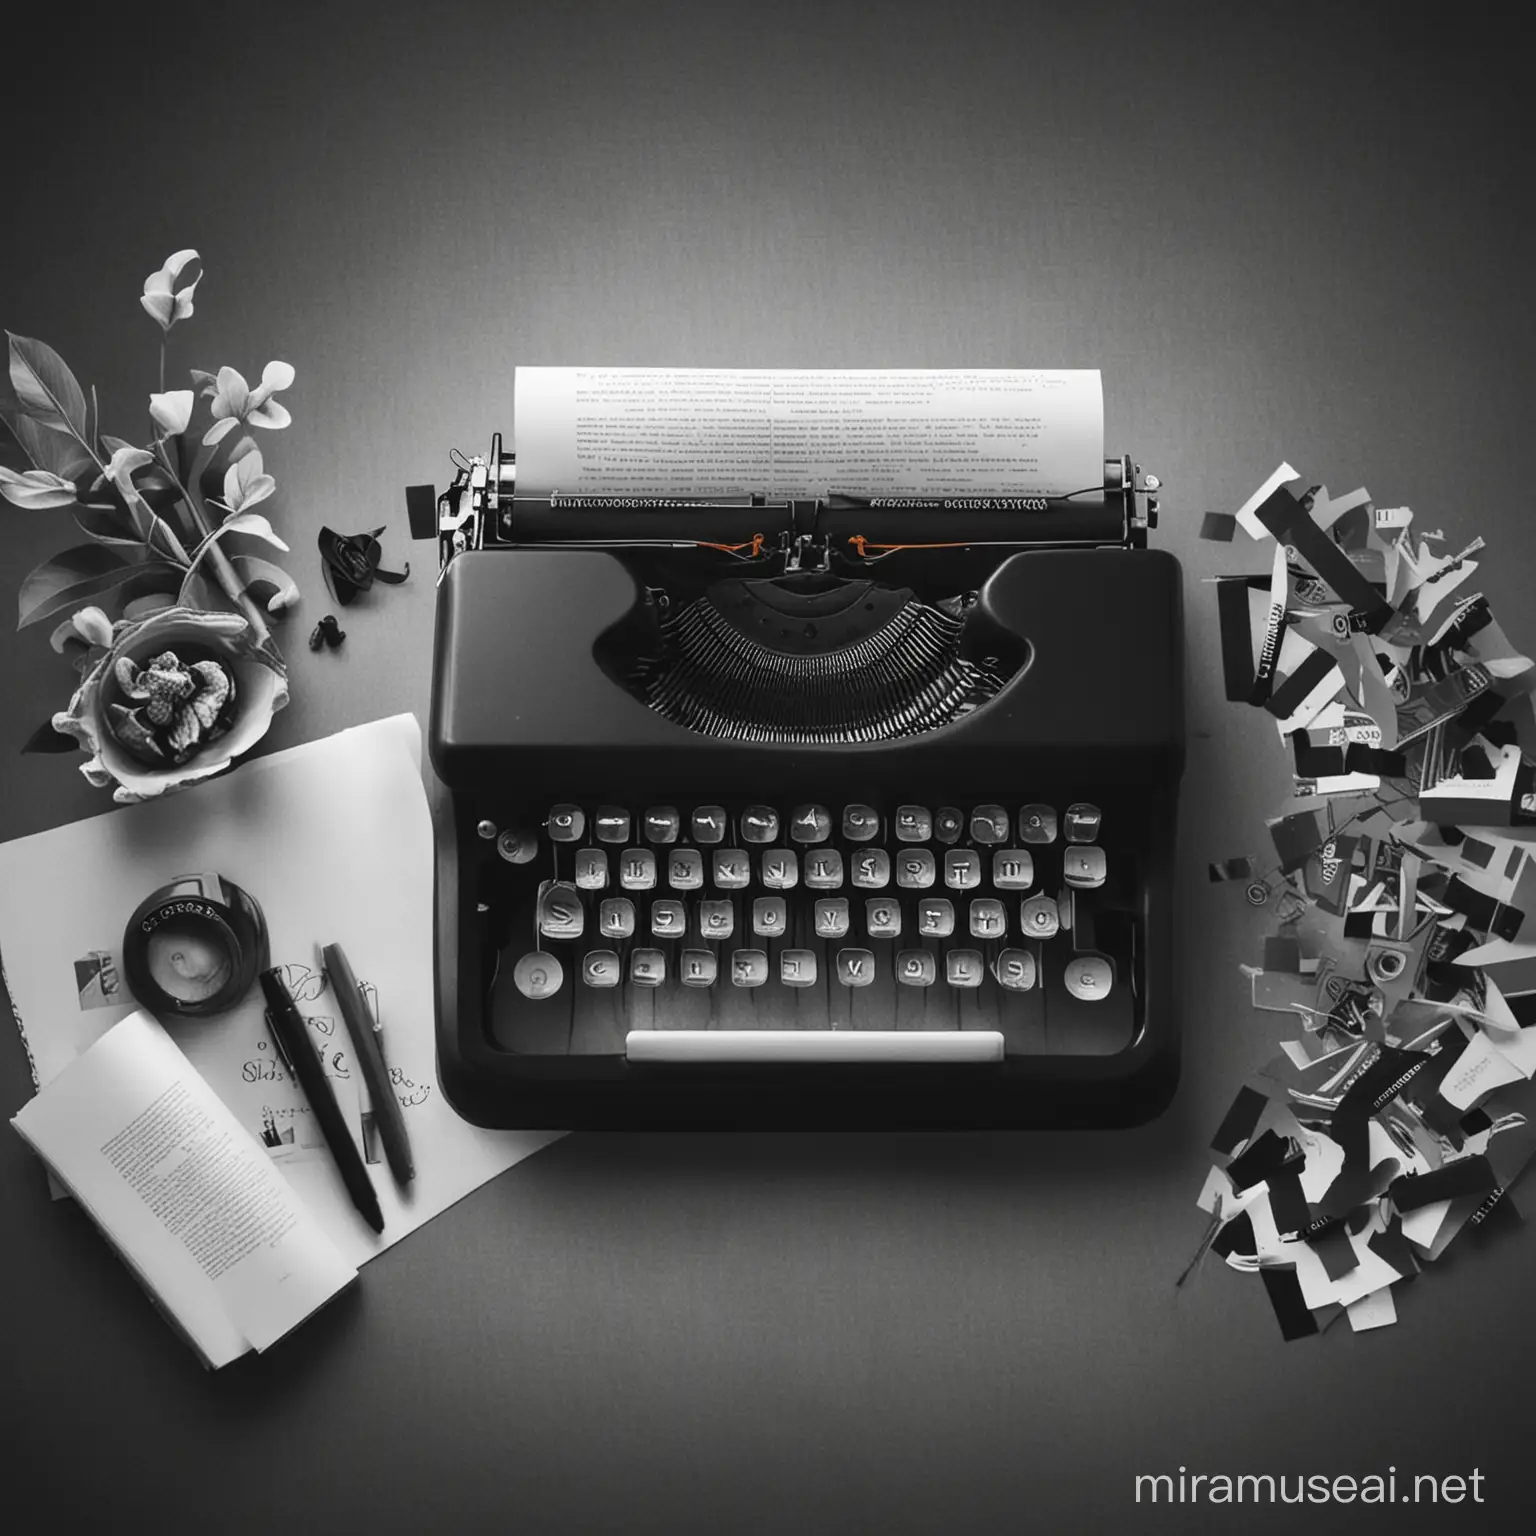 Monochrome Content Writing Creative Process in Shades of Grey